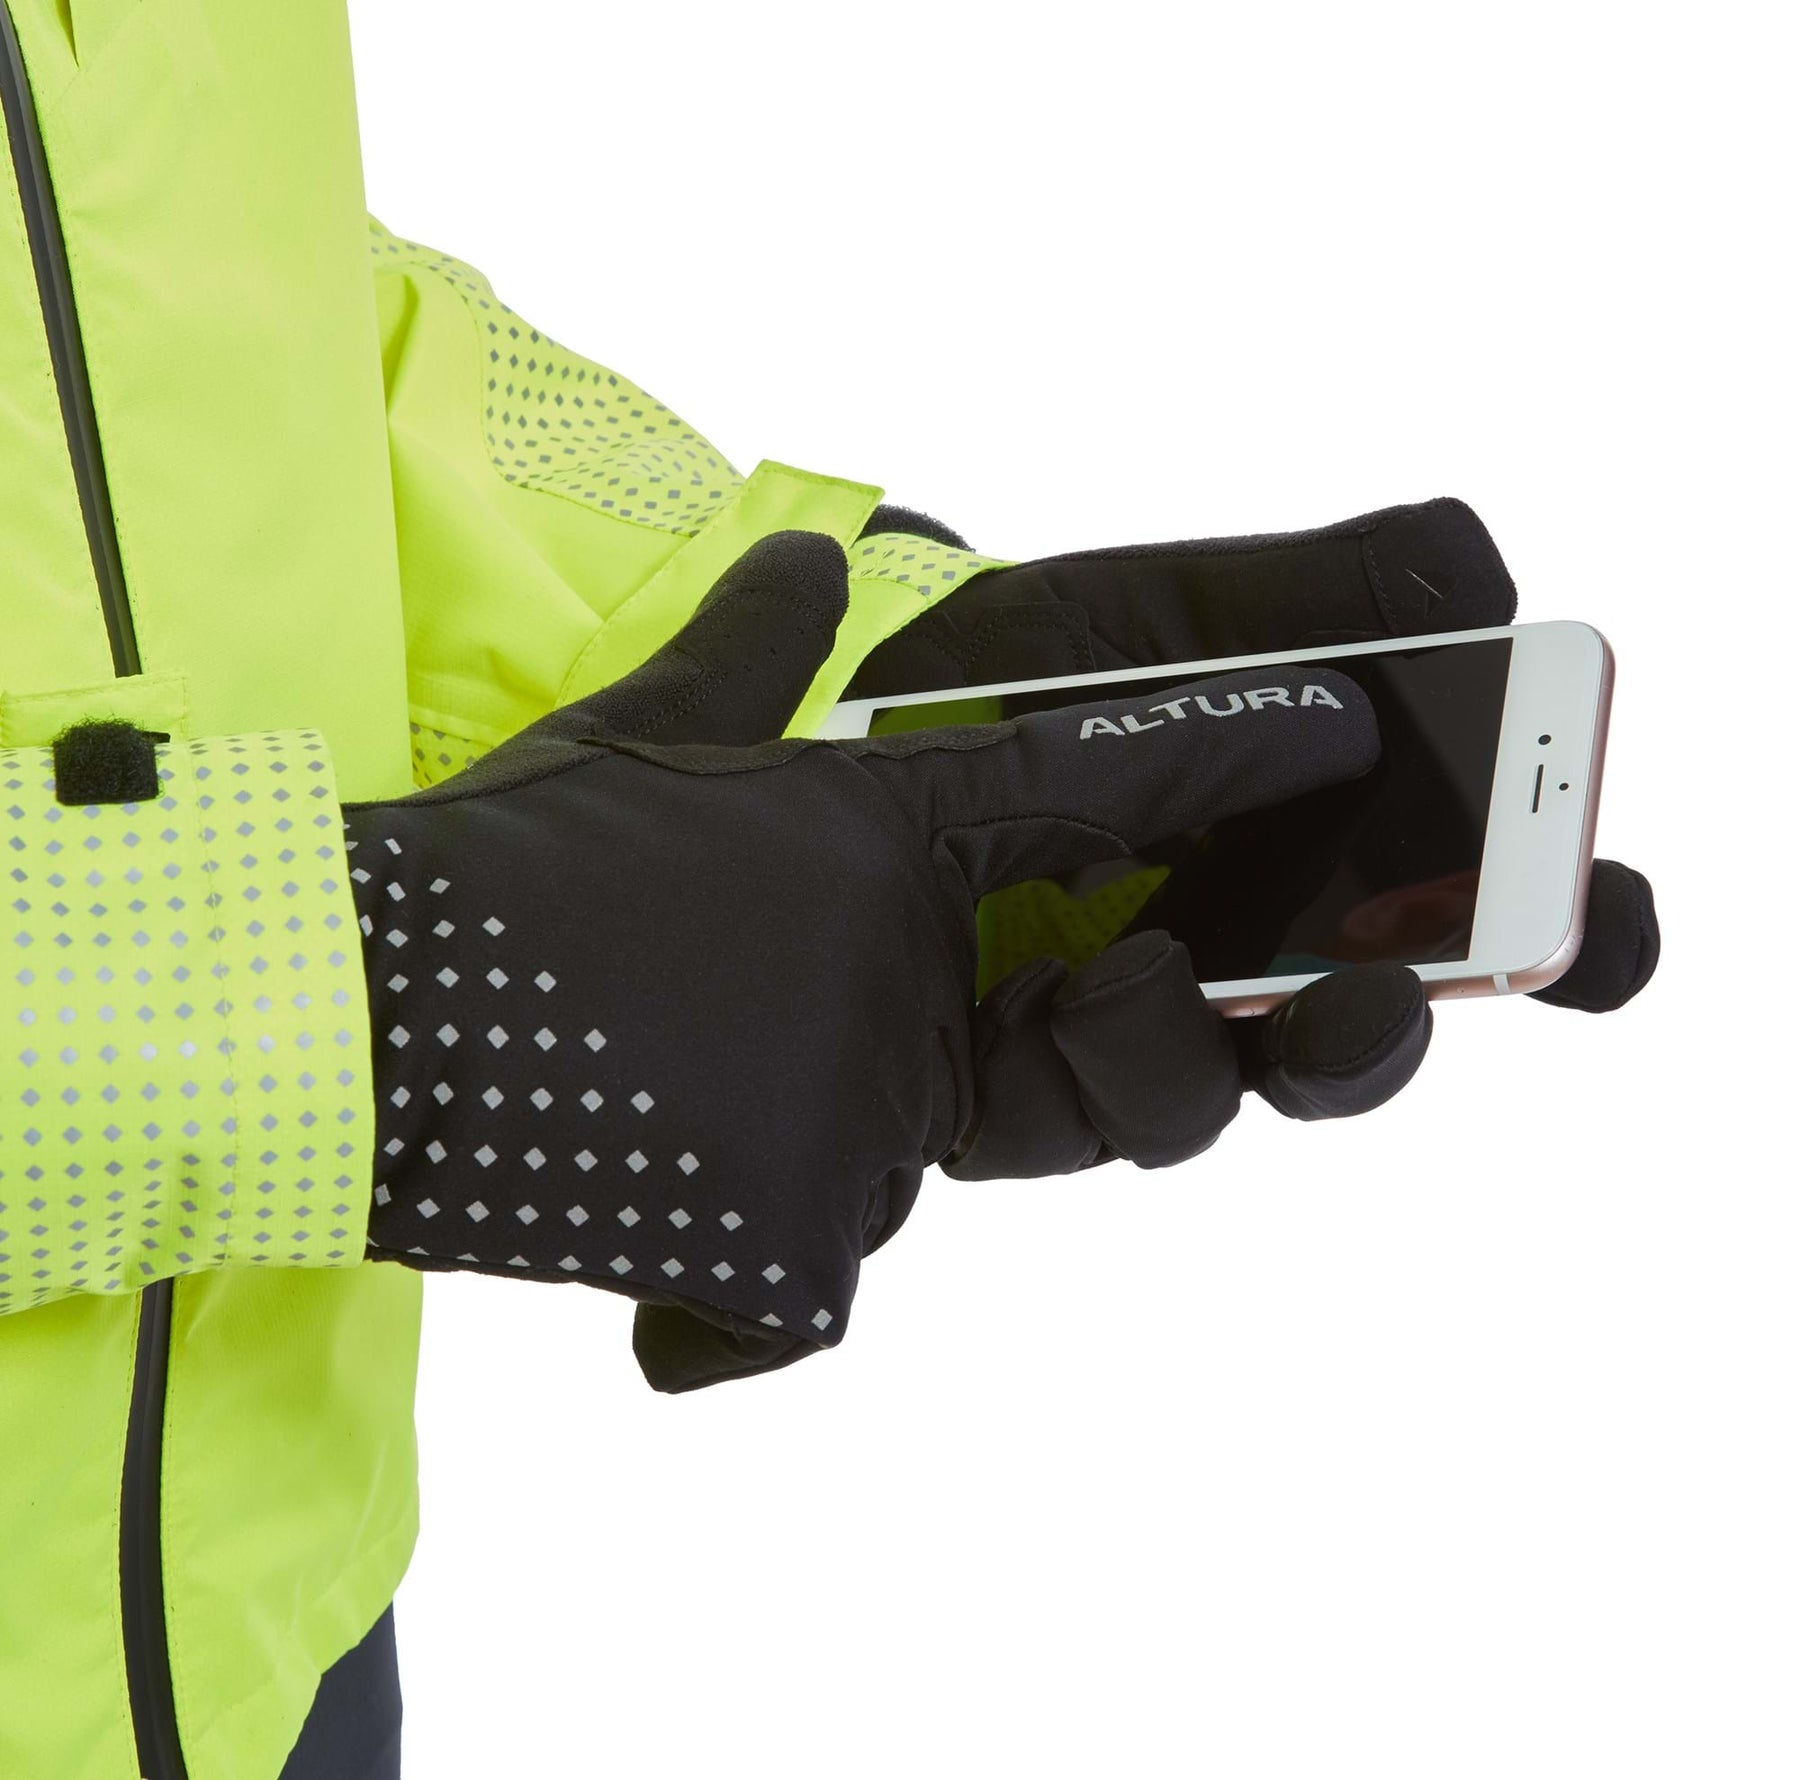 Altura Nightvision Insulated Waterproof Gloves